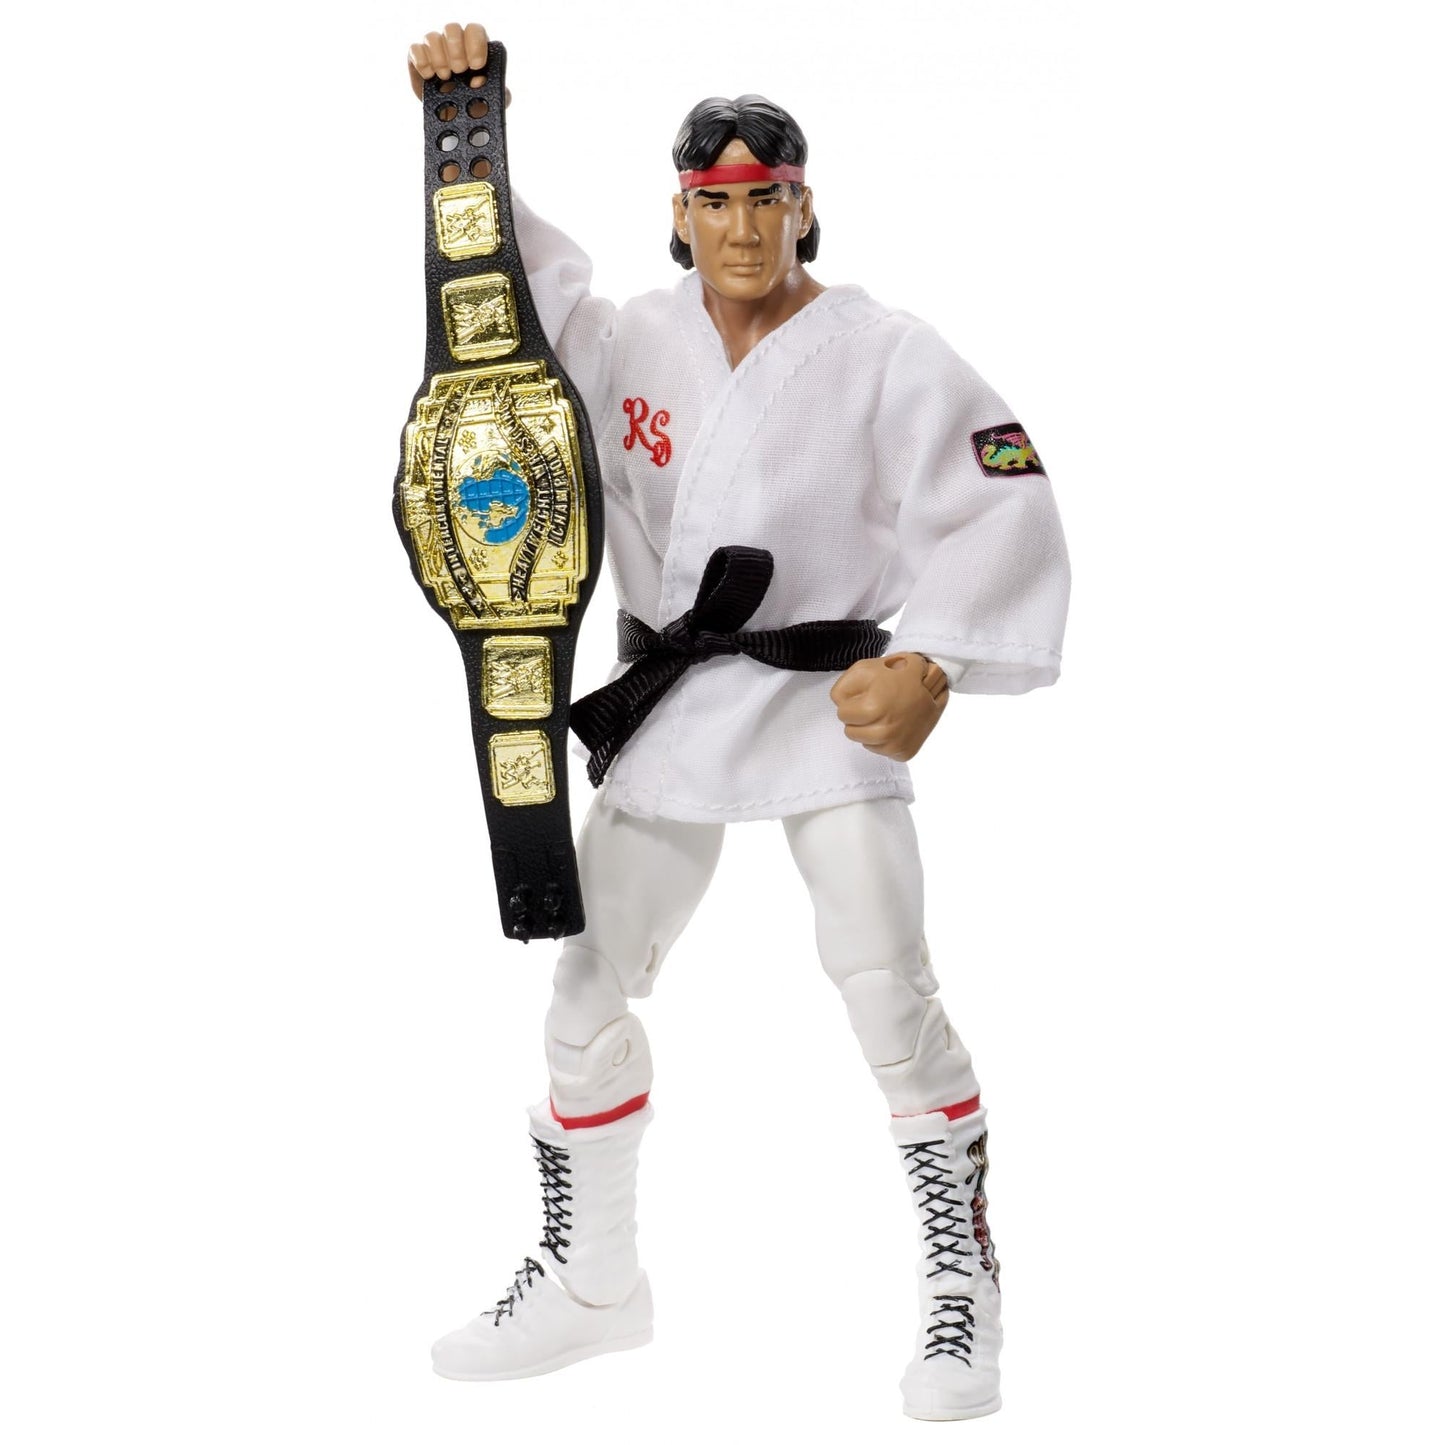 2018 WWE Mattel Elite Collection Flashback Series 3 Ricky "The Dragon" Steamboat [Exclusive]